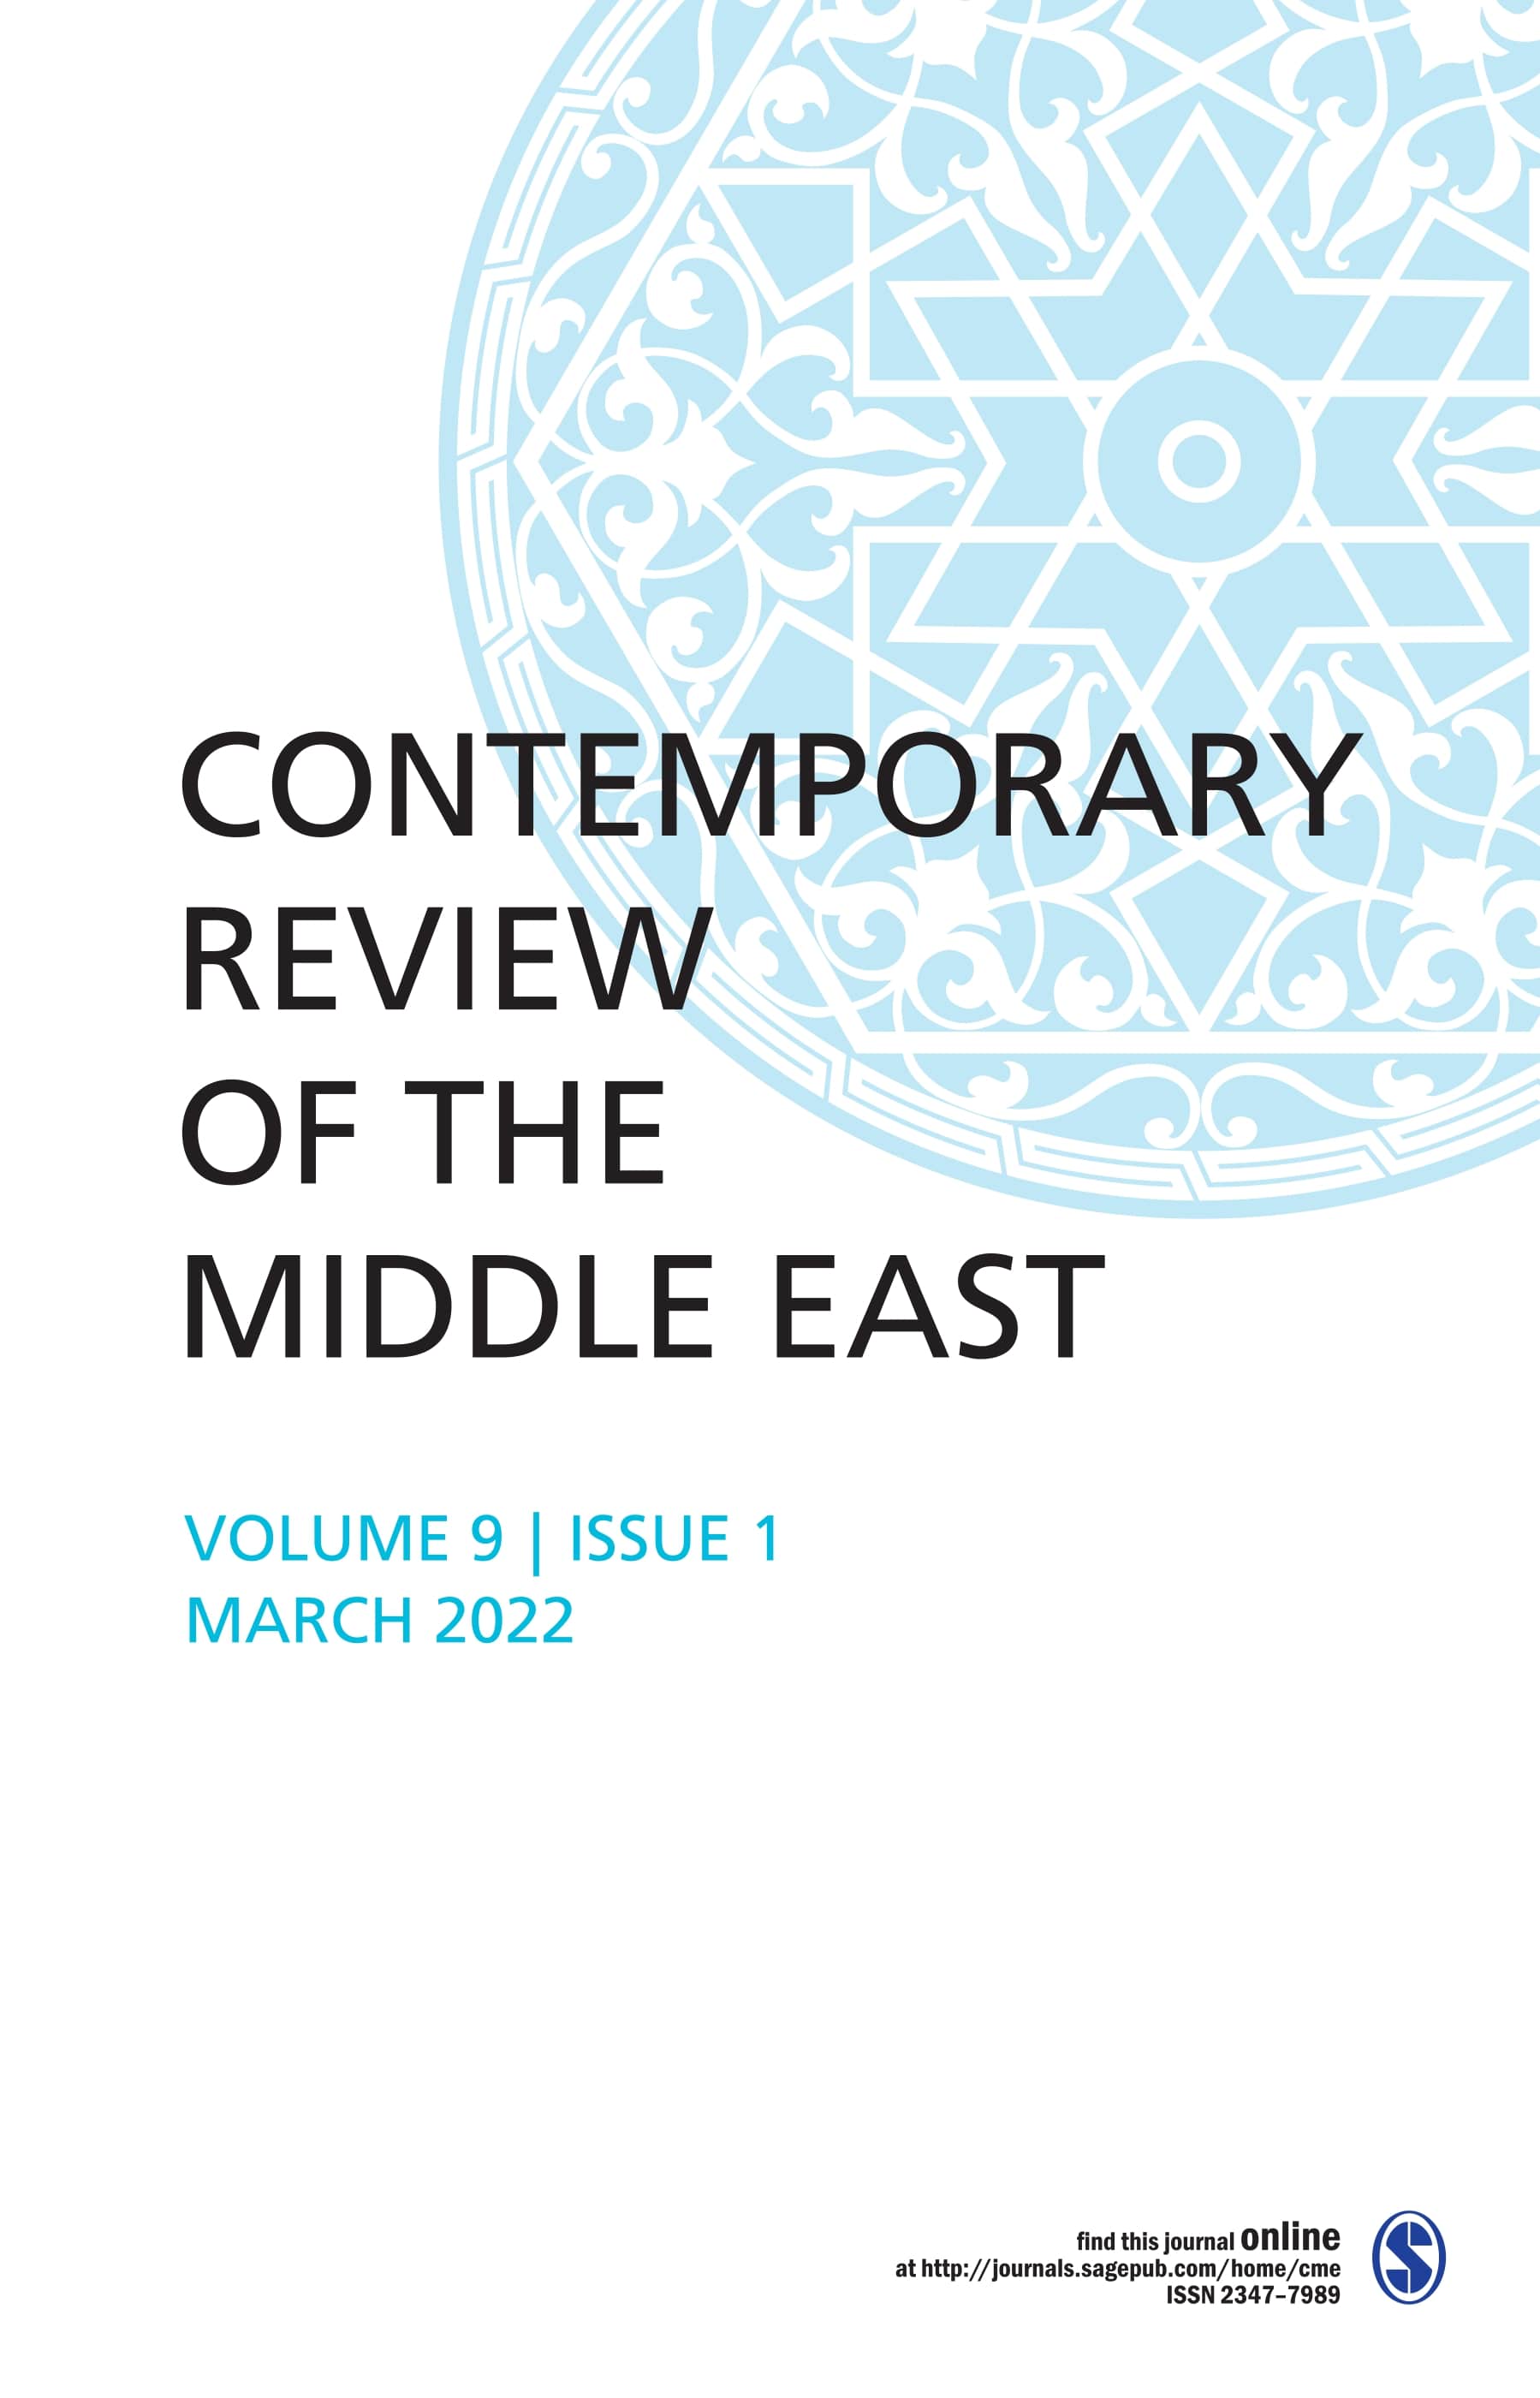 Contemporary Review of the Middle East Volume 9 Issue 1, March 2022: Articles	